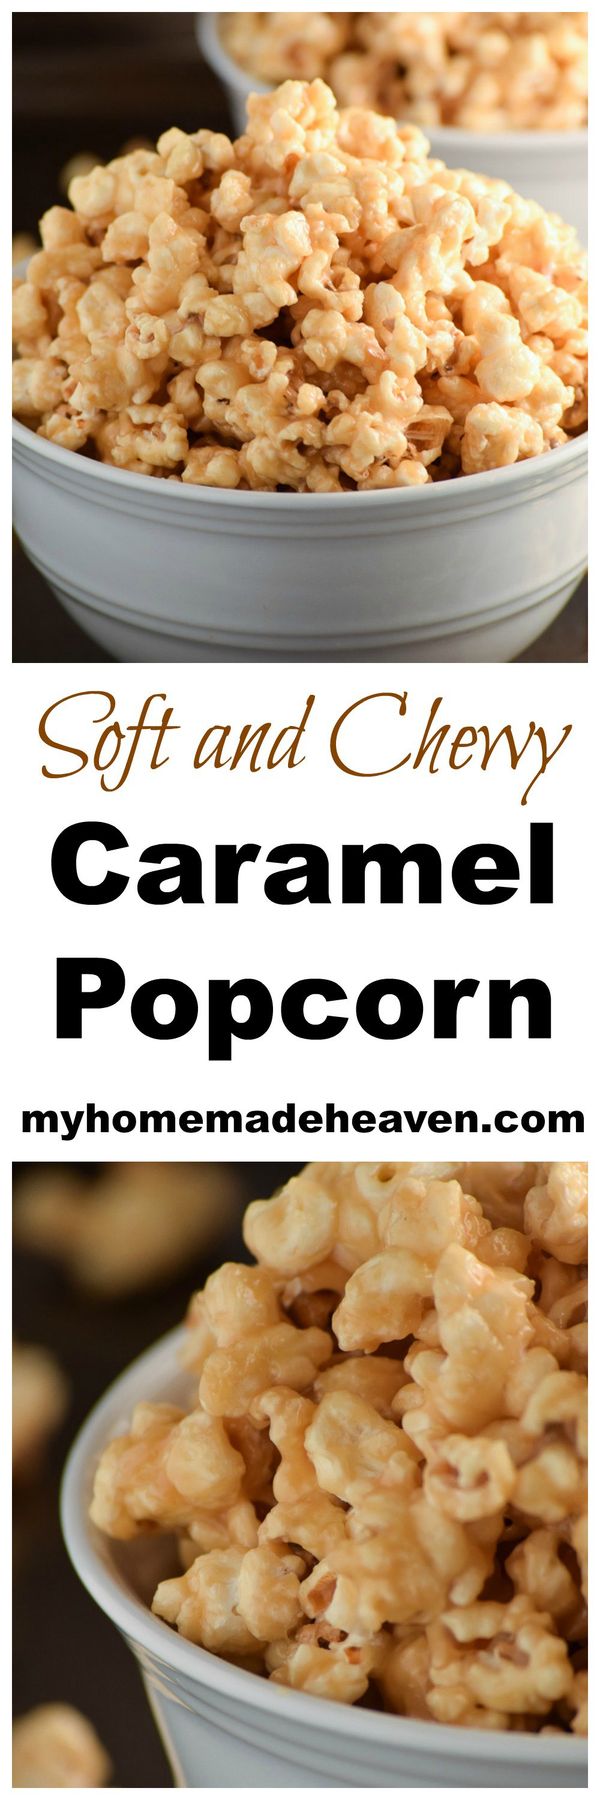 Soft and Chewy Caramel Popcorn